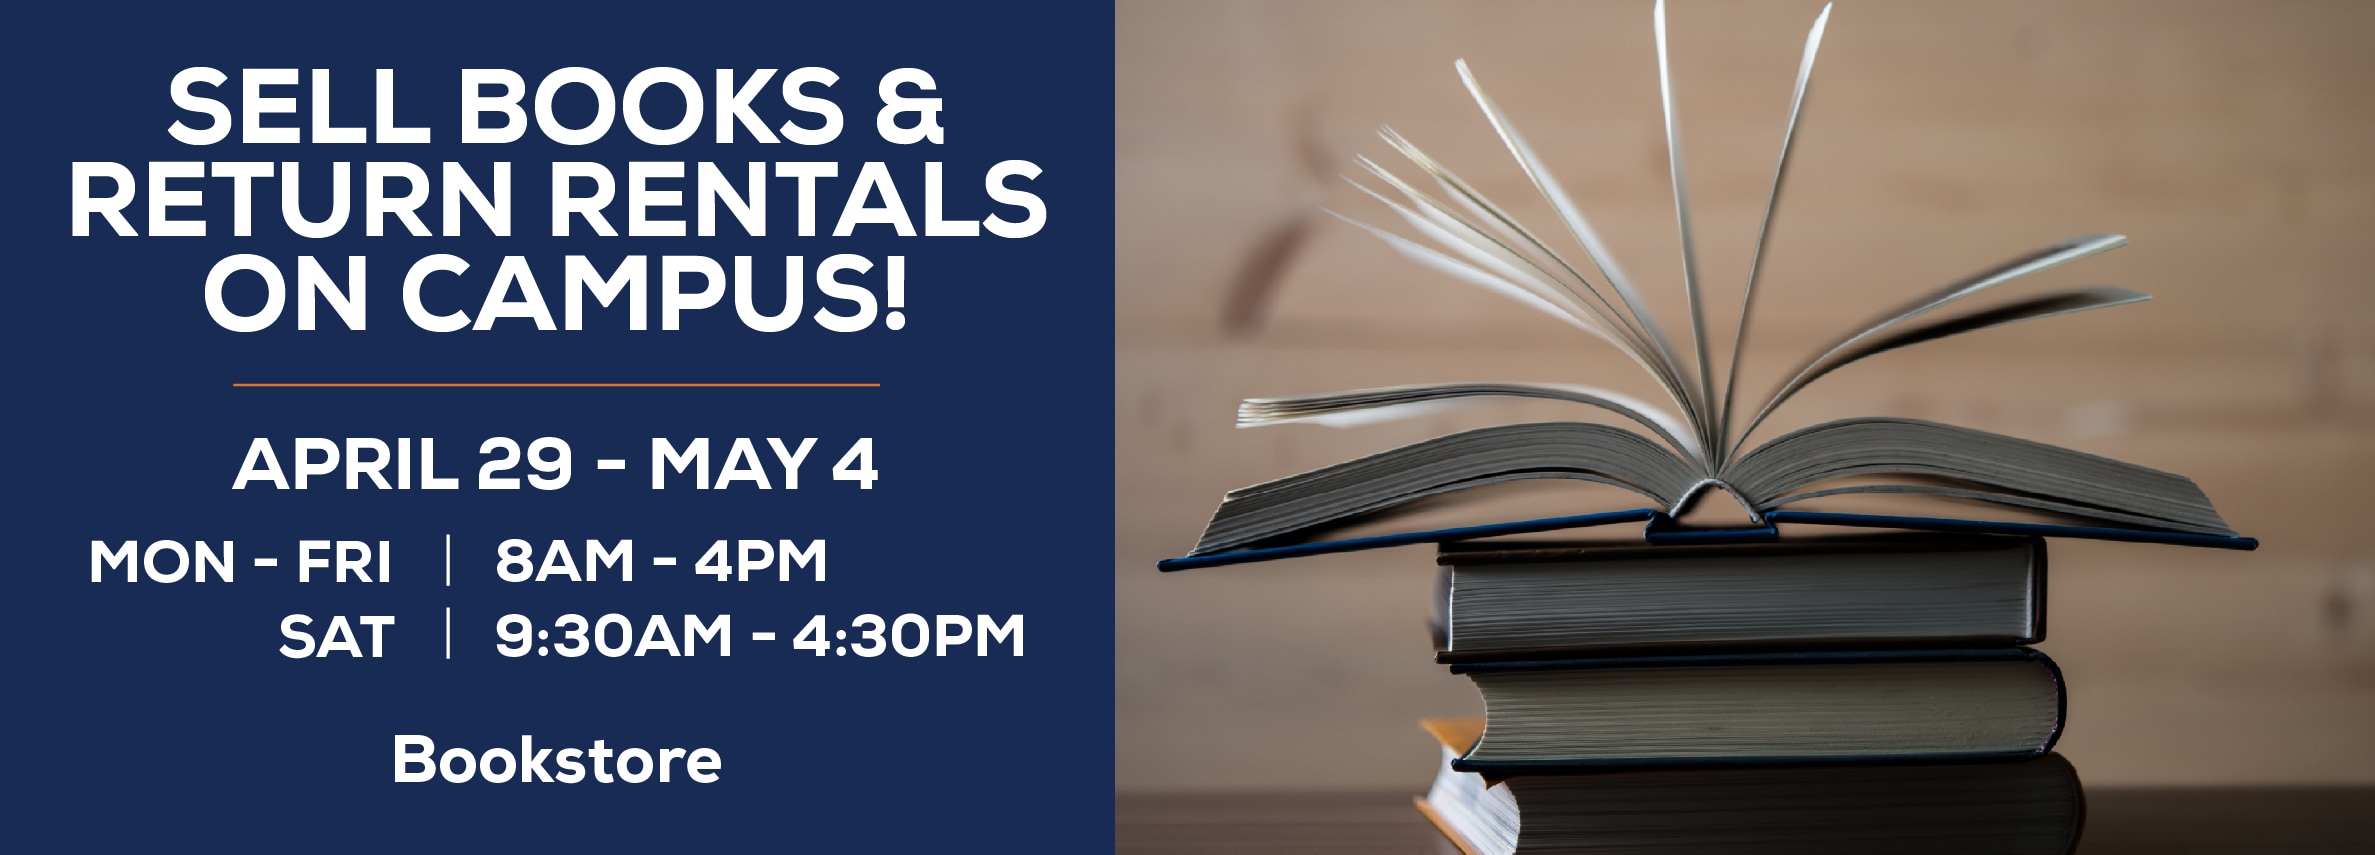 Sell Books & Return Rentals On Campus! April 29 - May 4 at Bookstore hours are M-F 8AM- 4 PM; Saturday 9:30AM-4:30PM